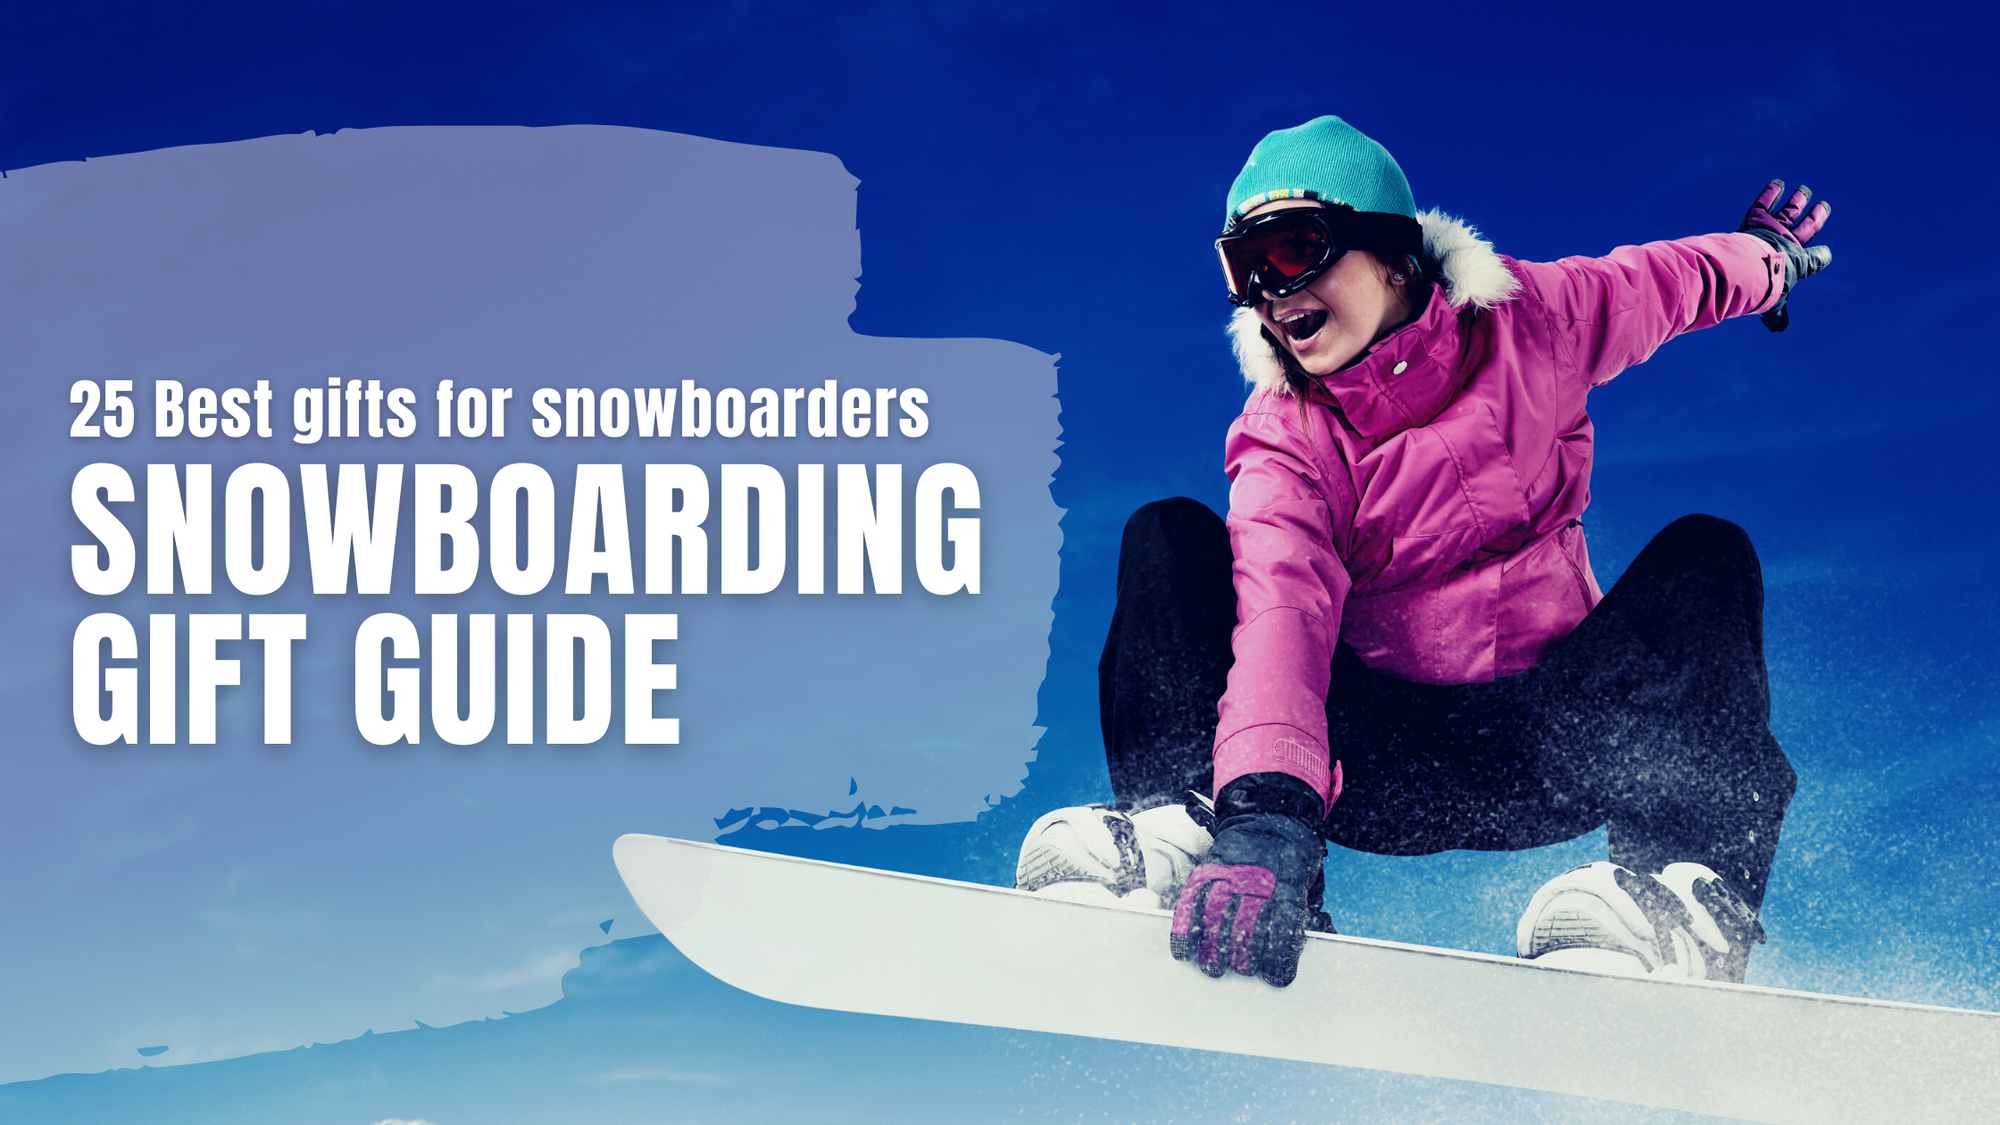 Gifts for snowboarders